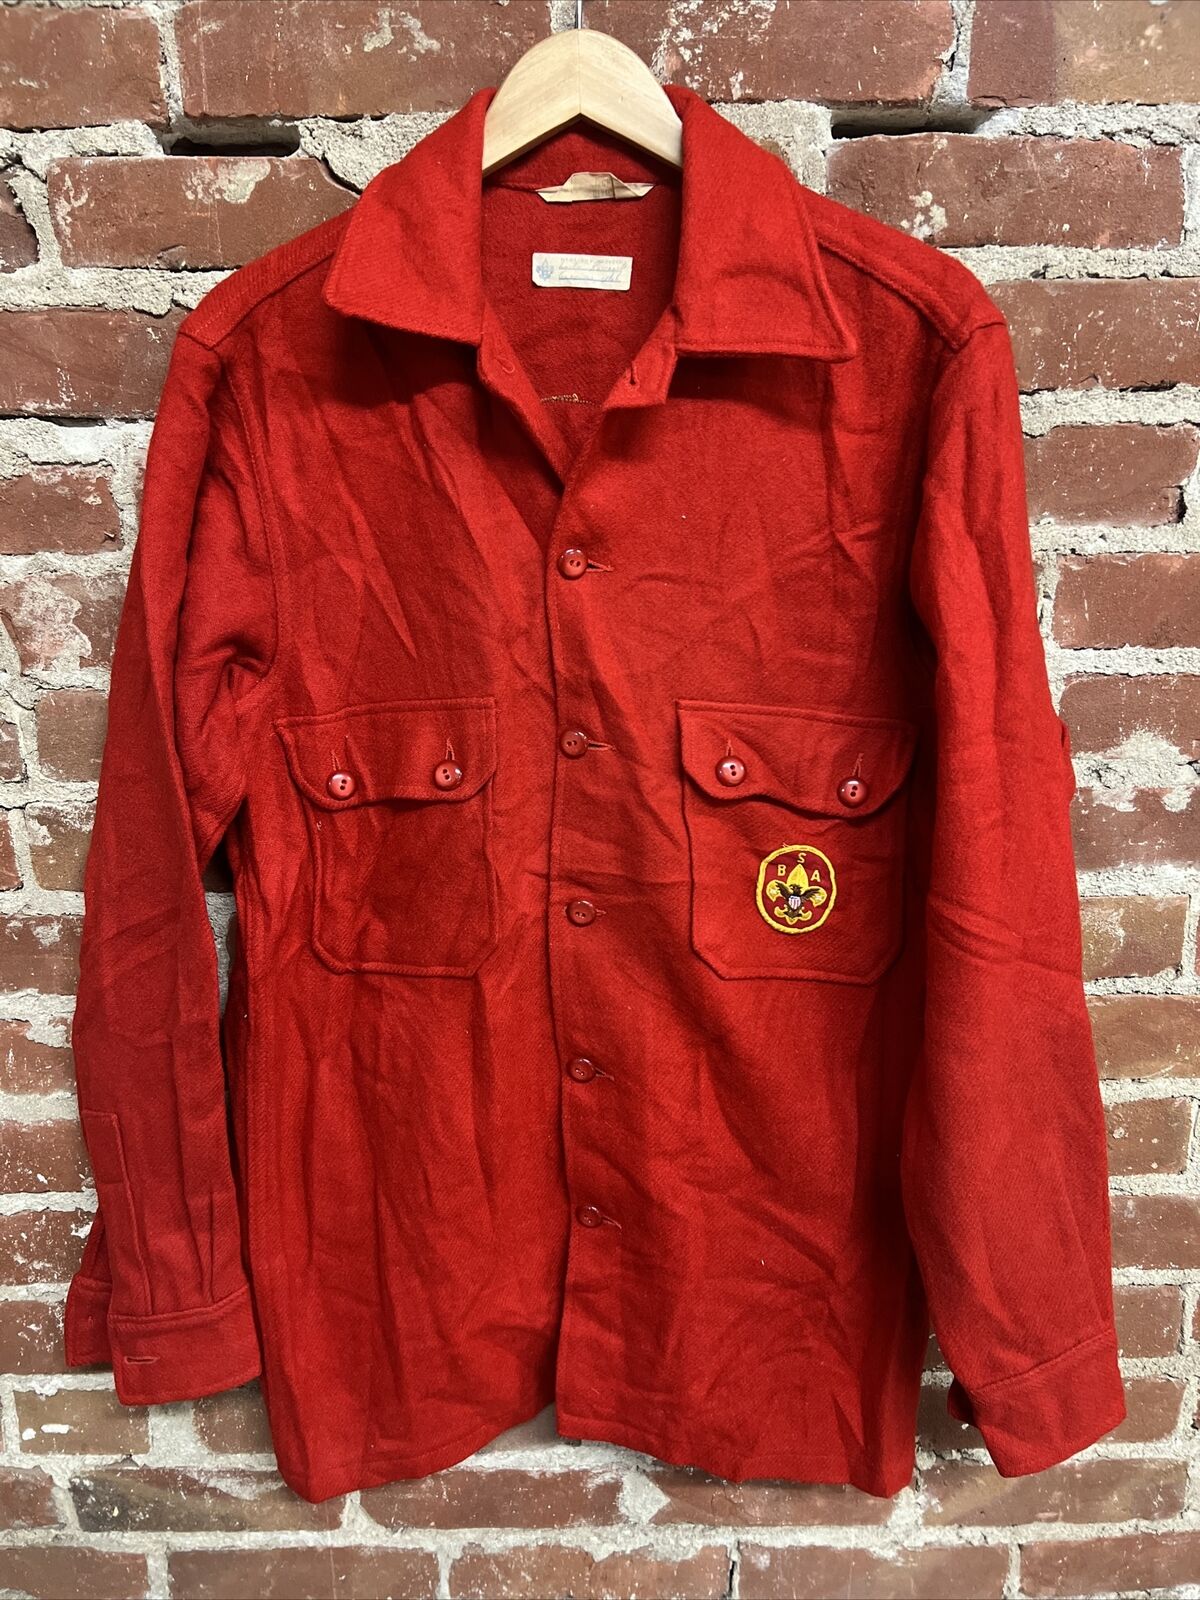 Vintage OFFICAL BOY SCOUTS ADULT Size 40 WOOL RED JACKET WITH Patches T30